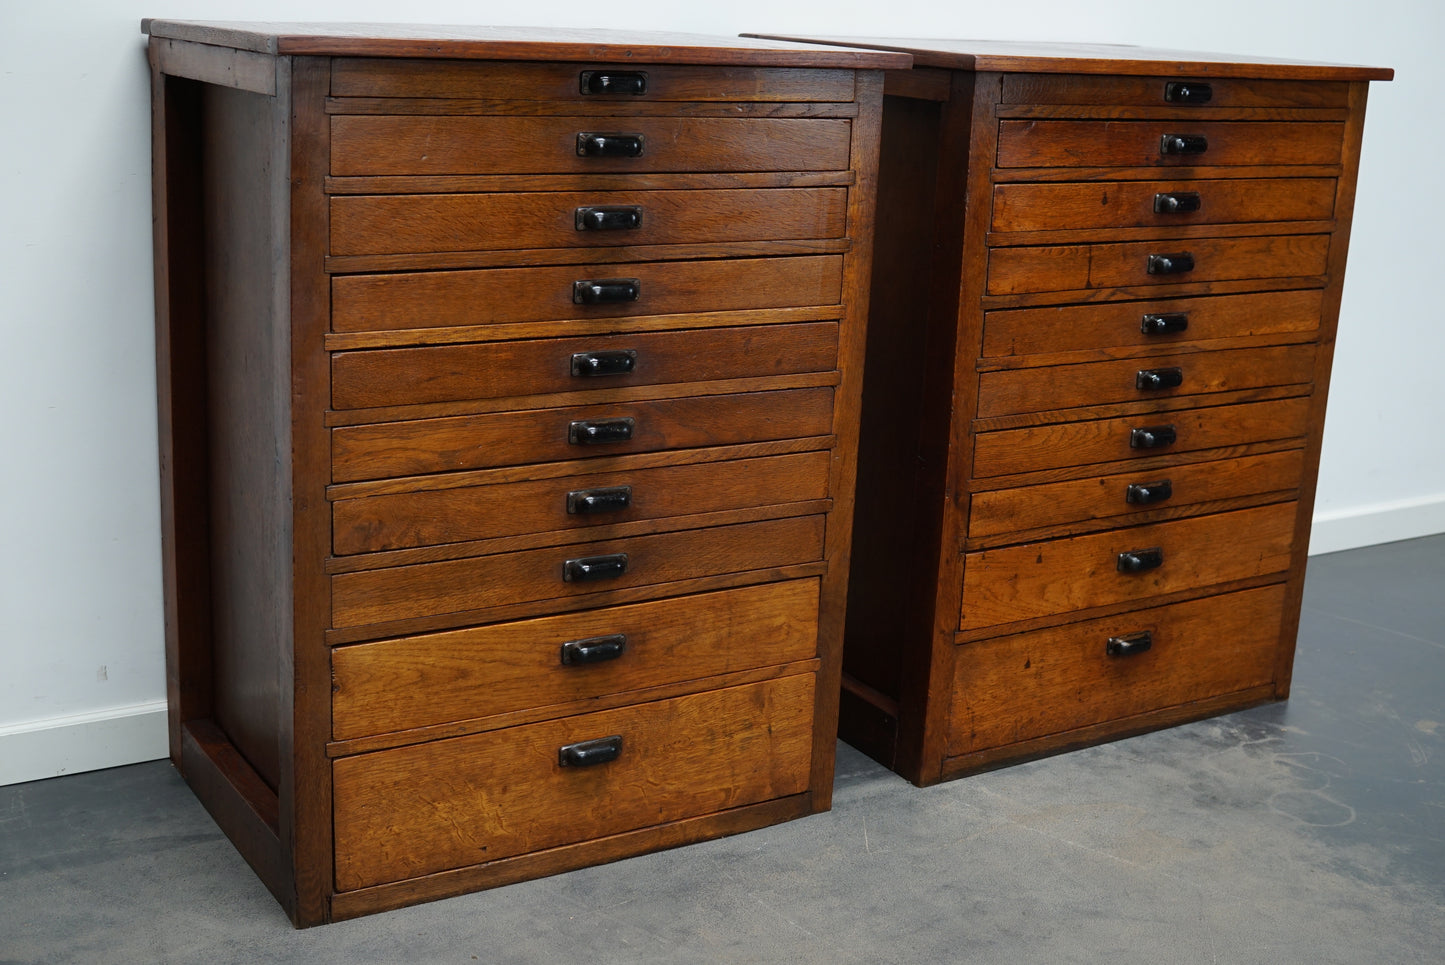 Pair of Vintage Dutch Oak Jewelers / Watchmakers Cabinets, circa 1930